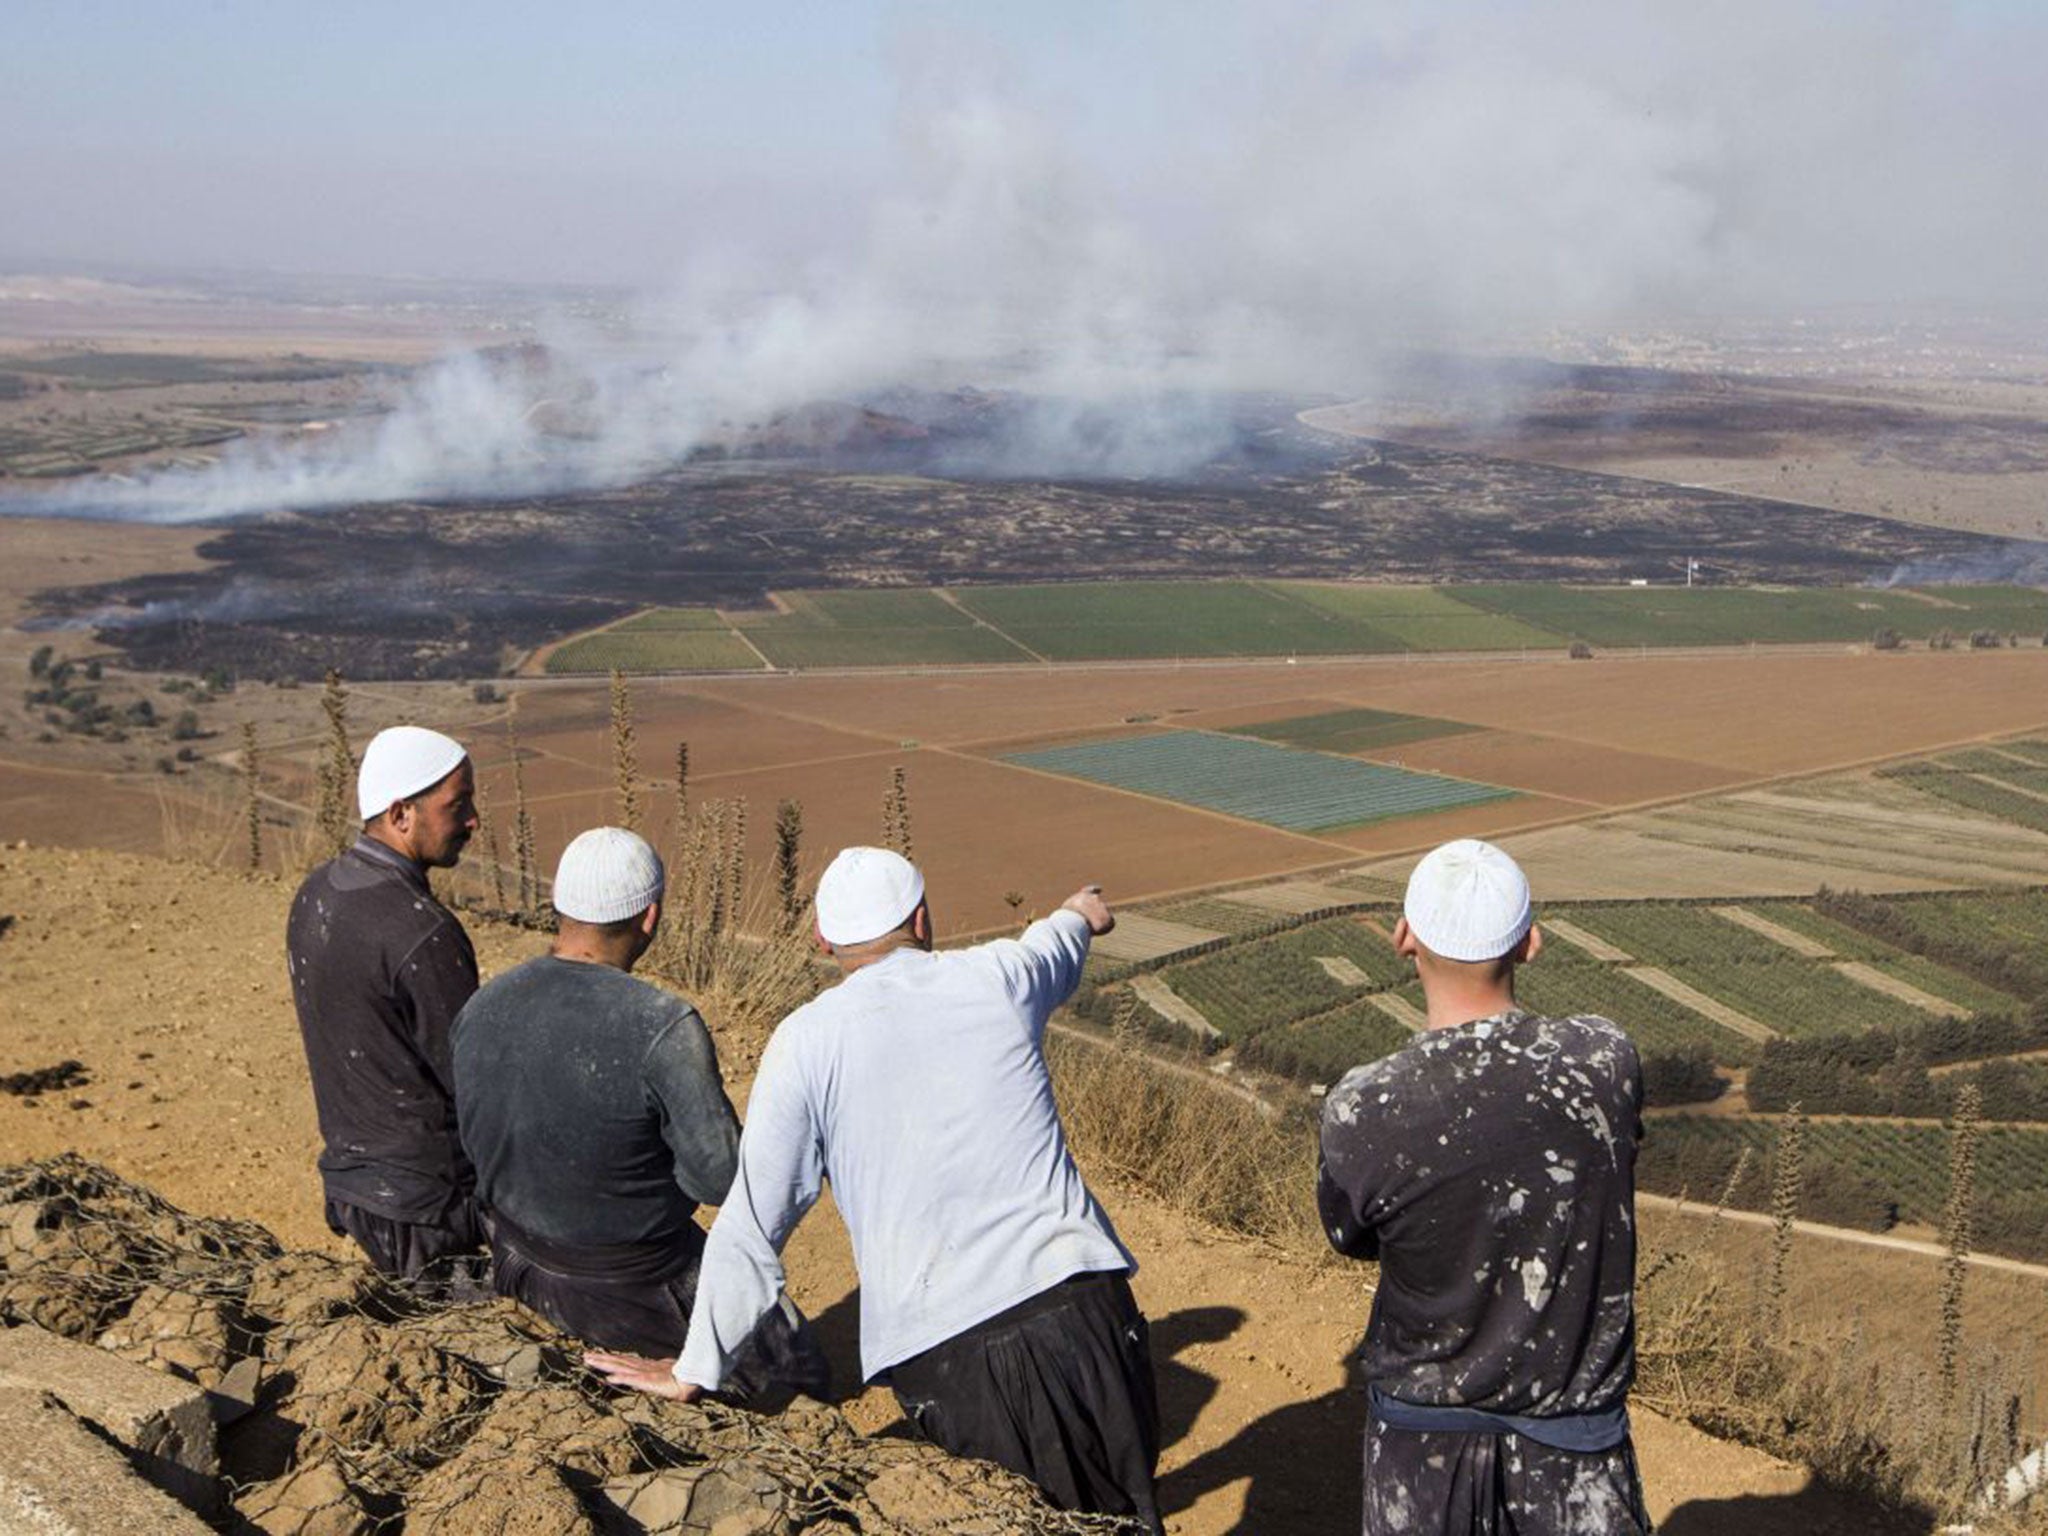 Druze men in the Golan Heights look on as smoke rises from the fighting between forces loyal to President Assad and rebels over the control of the Quneitra border crossing